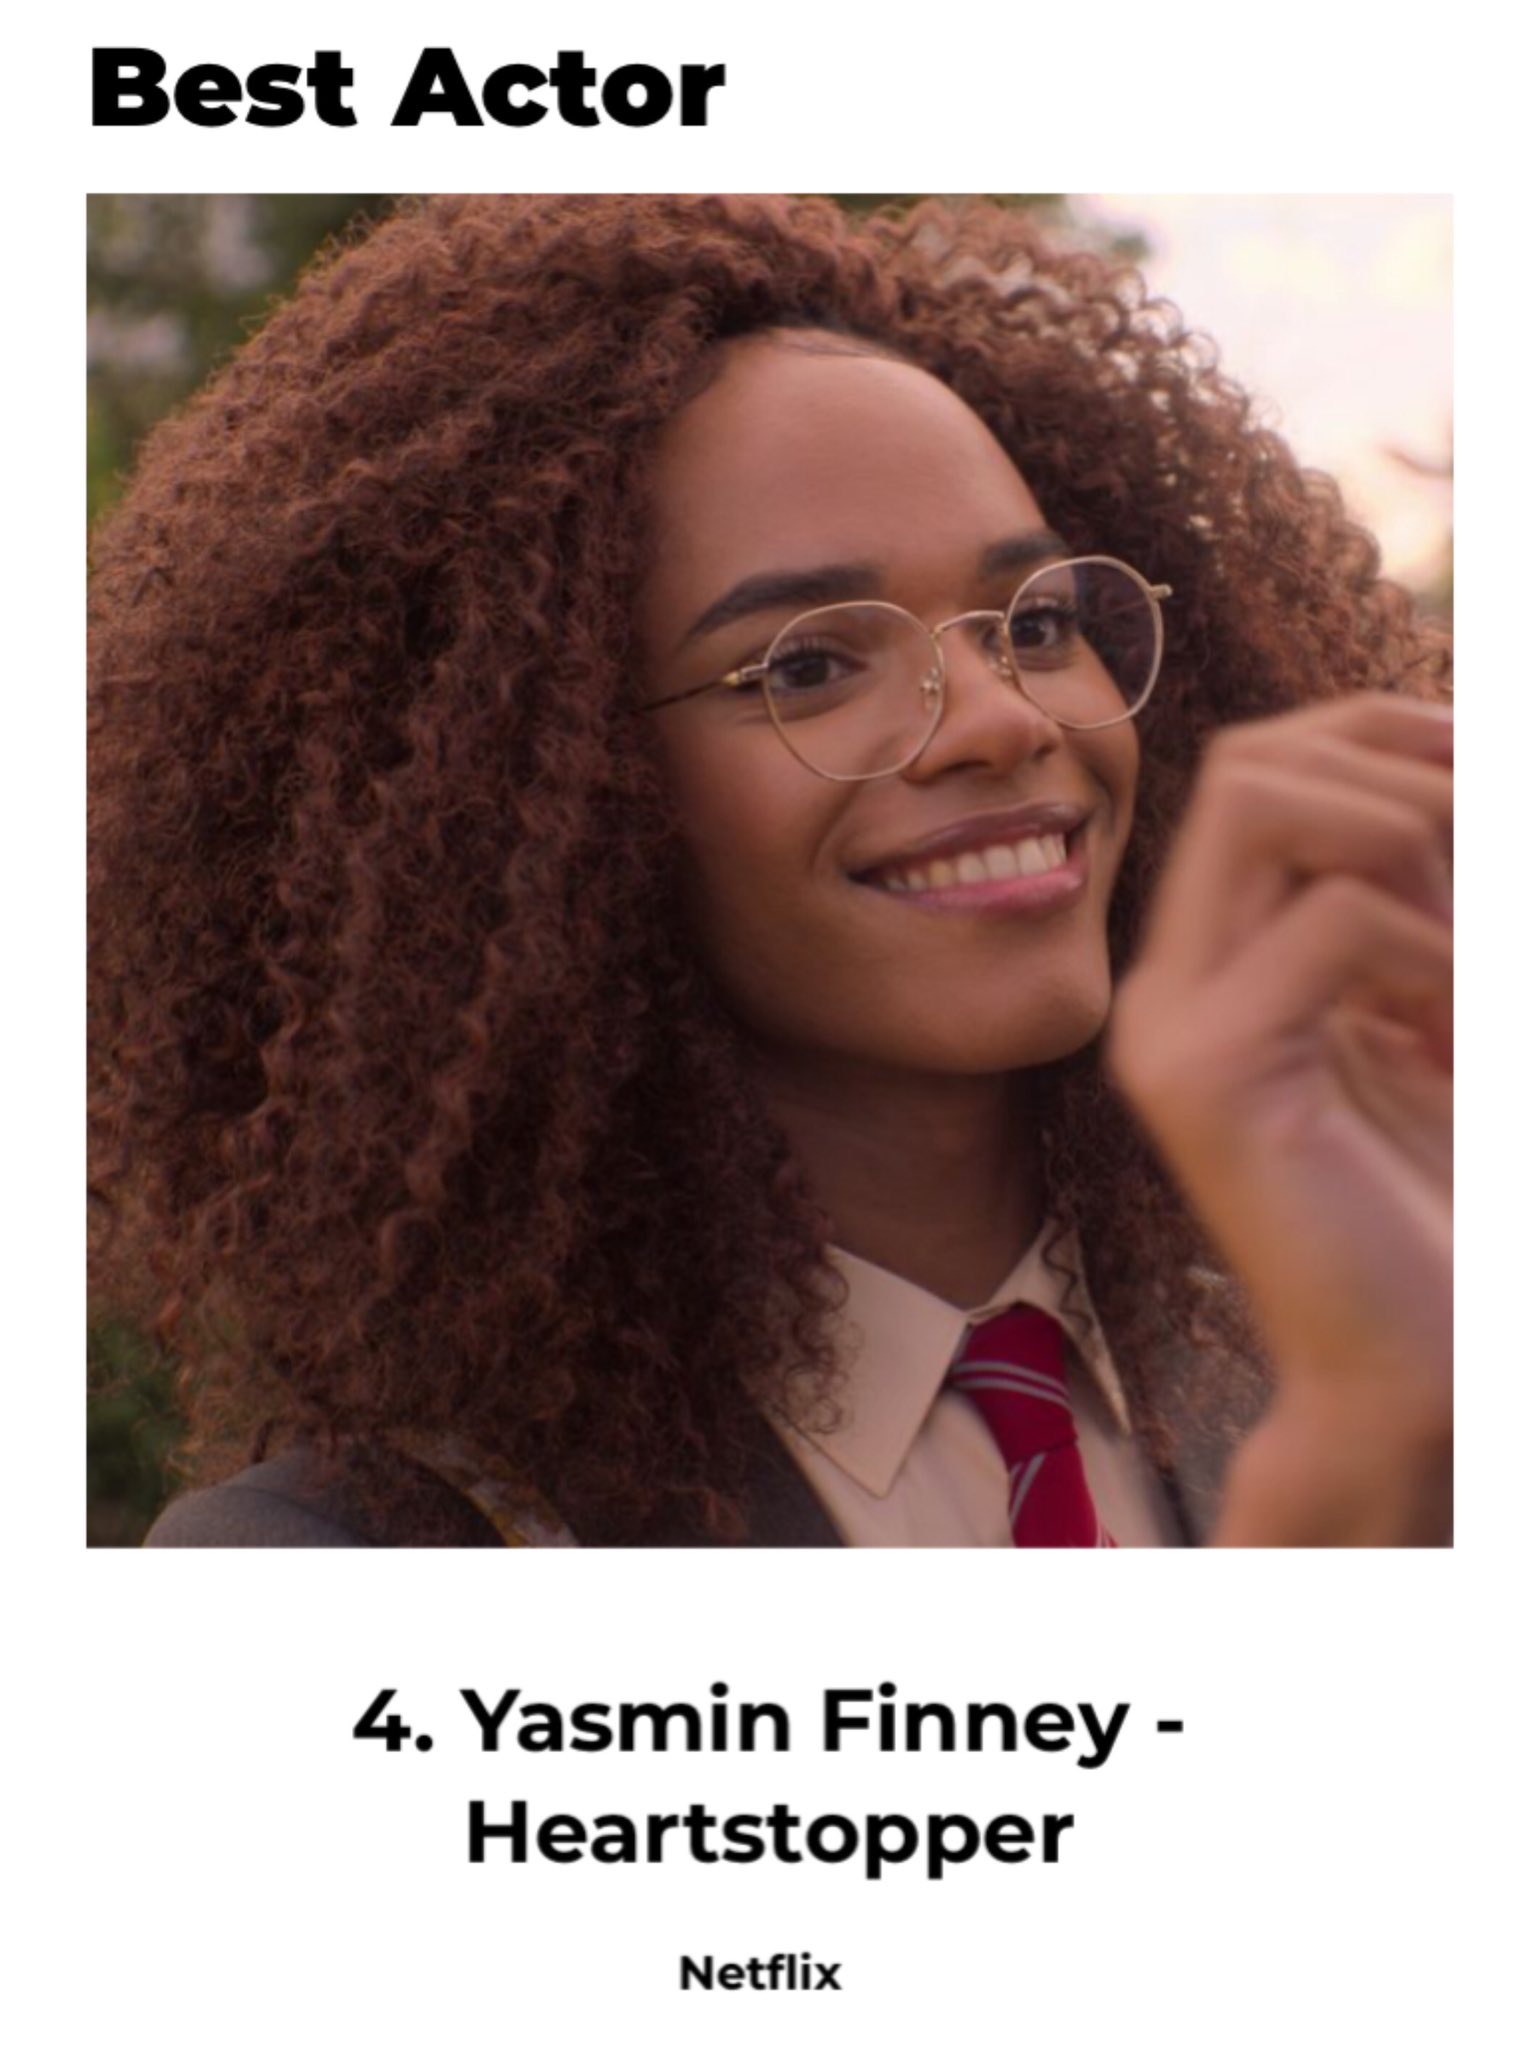 yasmin finney updates on X: 📂 Yaz wins 4th place as Best Actor